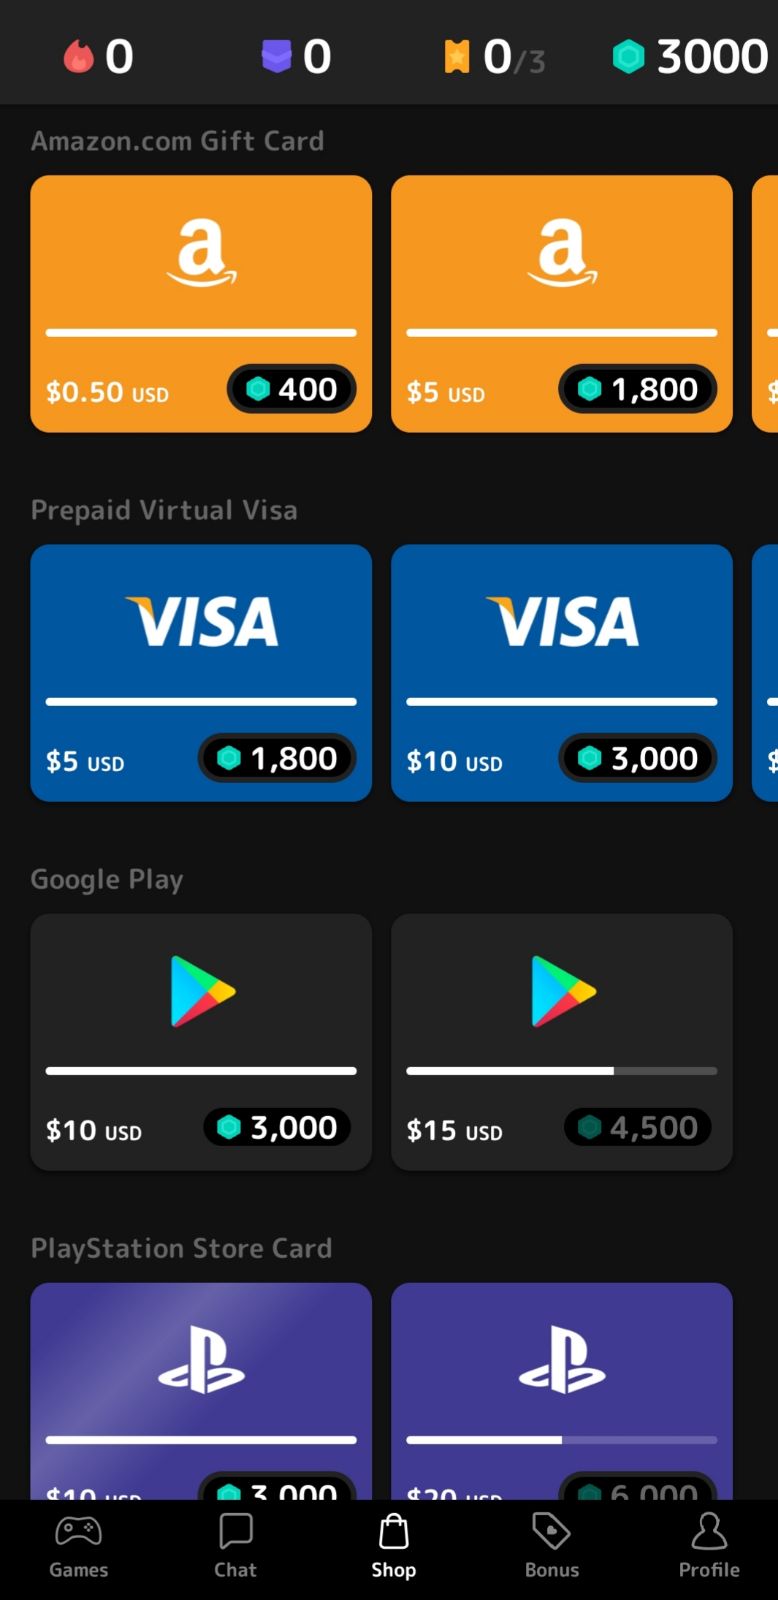 How to Get Amazon Gift Cards with Mistplay?